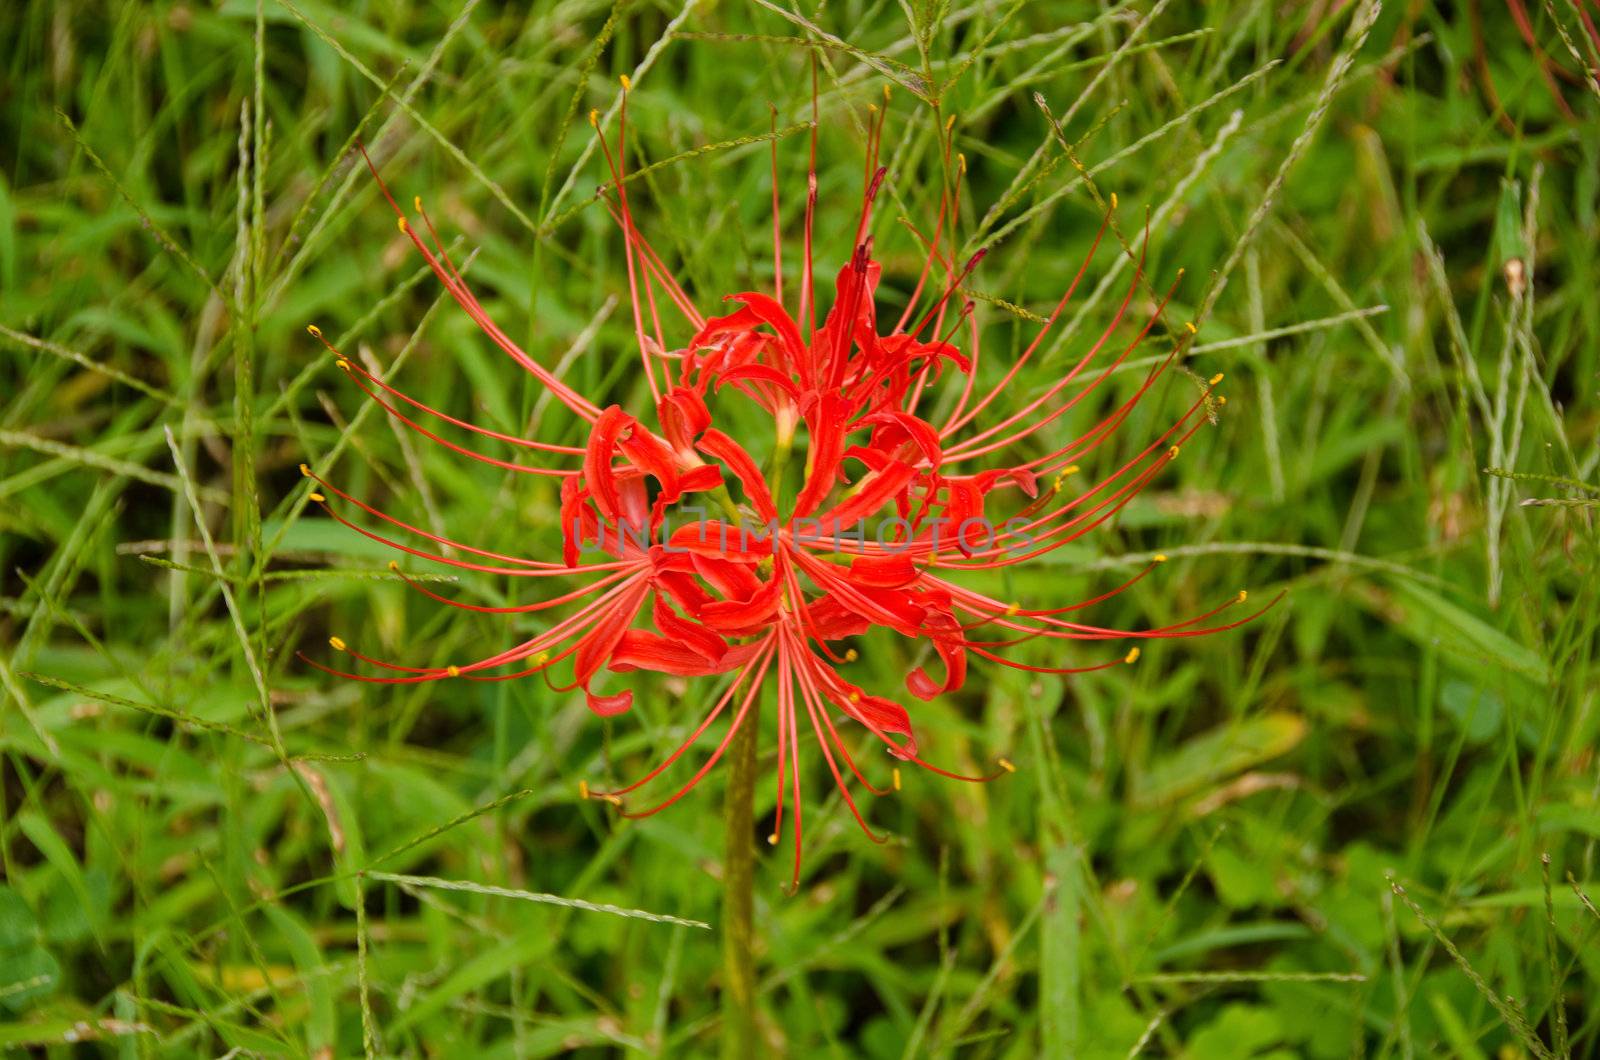 Flower of the Red spider lily, Lycoris radiata